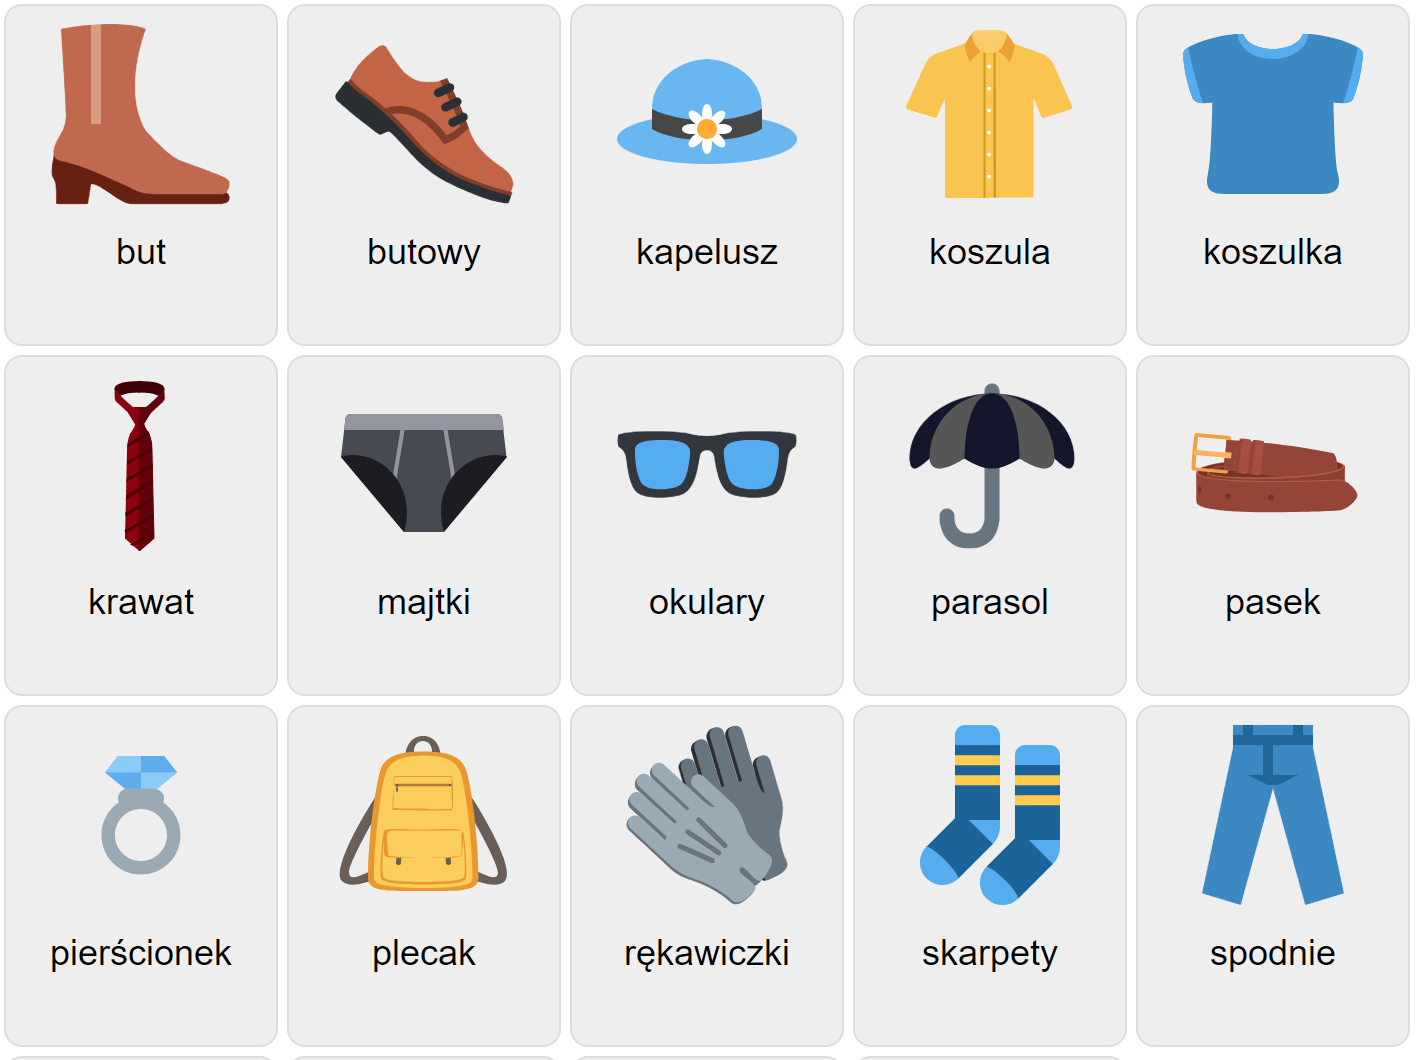 Clothes in Polish